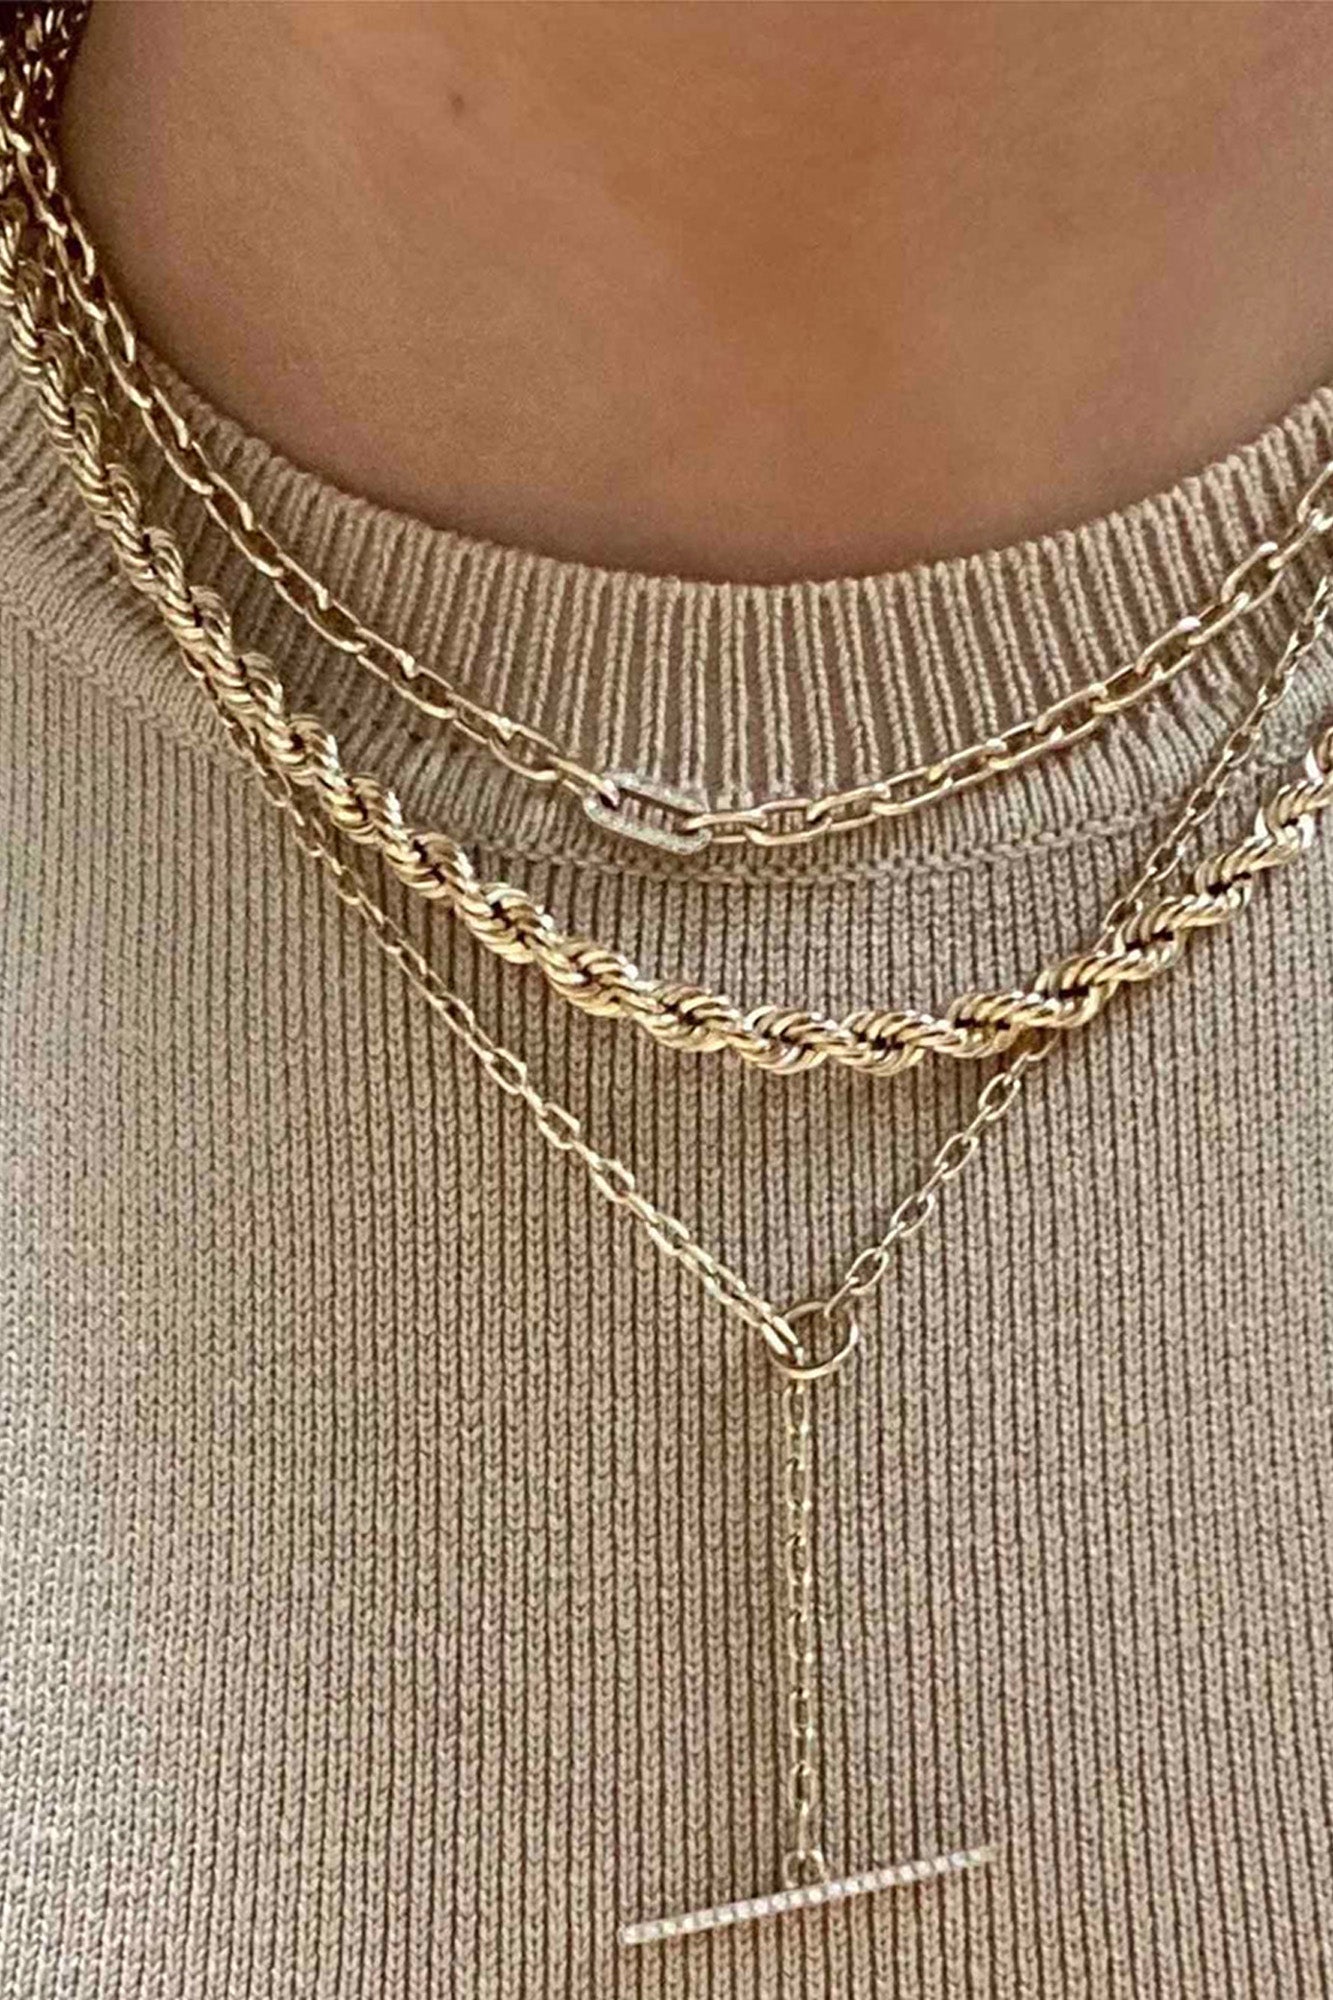 Zoe Chicco Medium Square Oval Chain With Pavé Diamond Link Necklace in 14k Yellow Gold